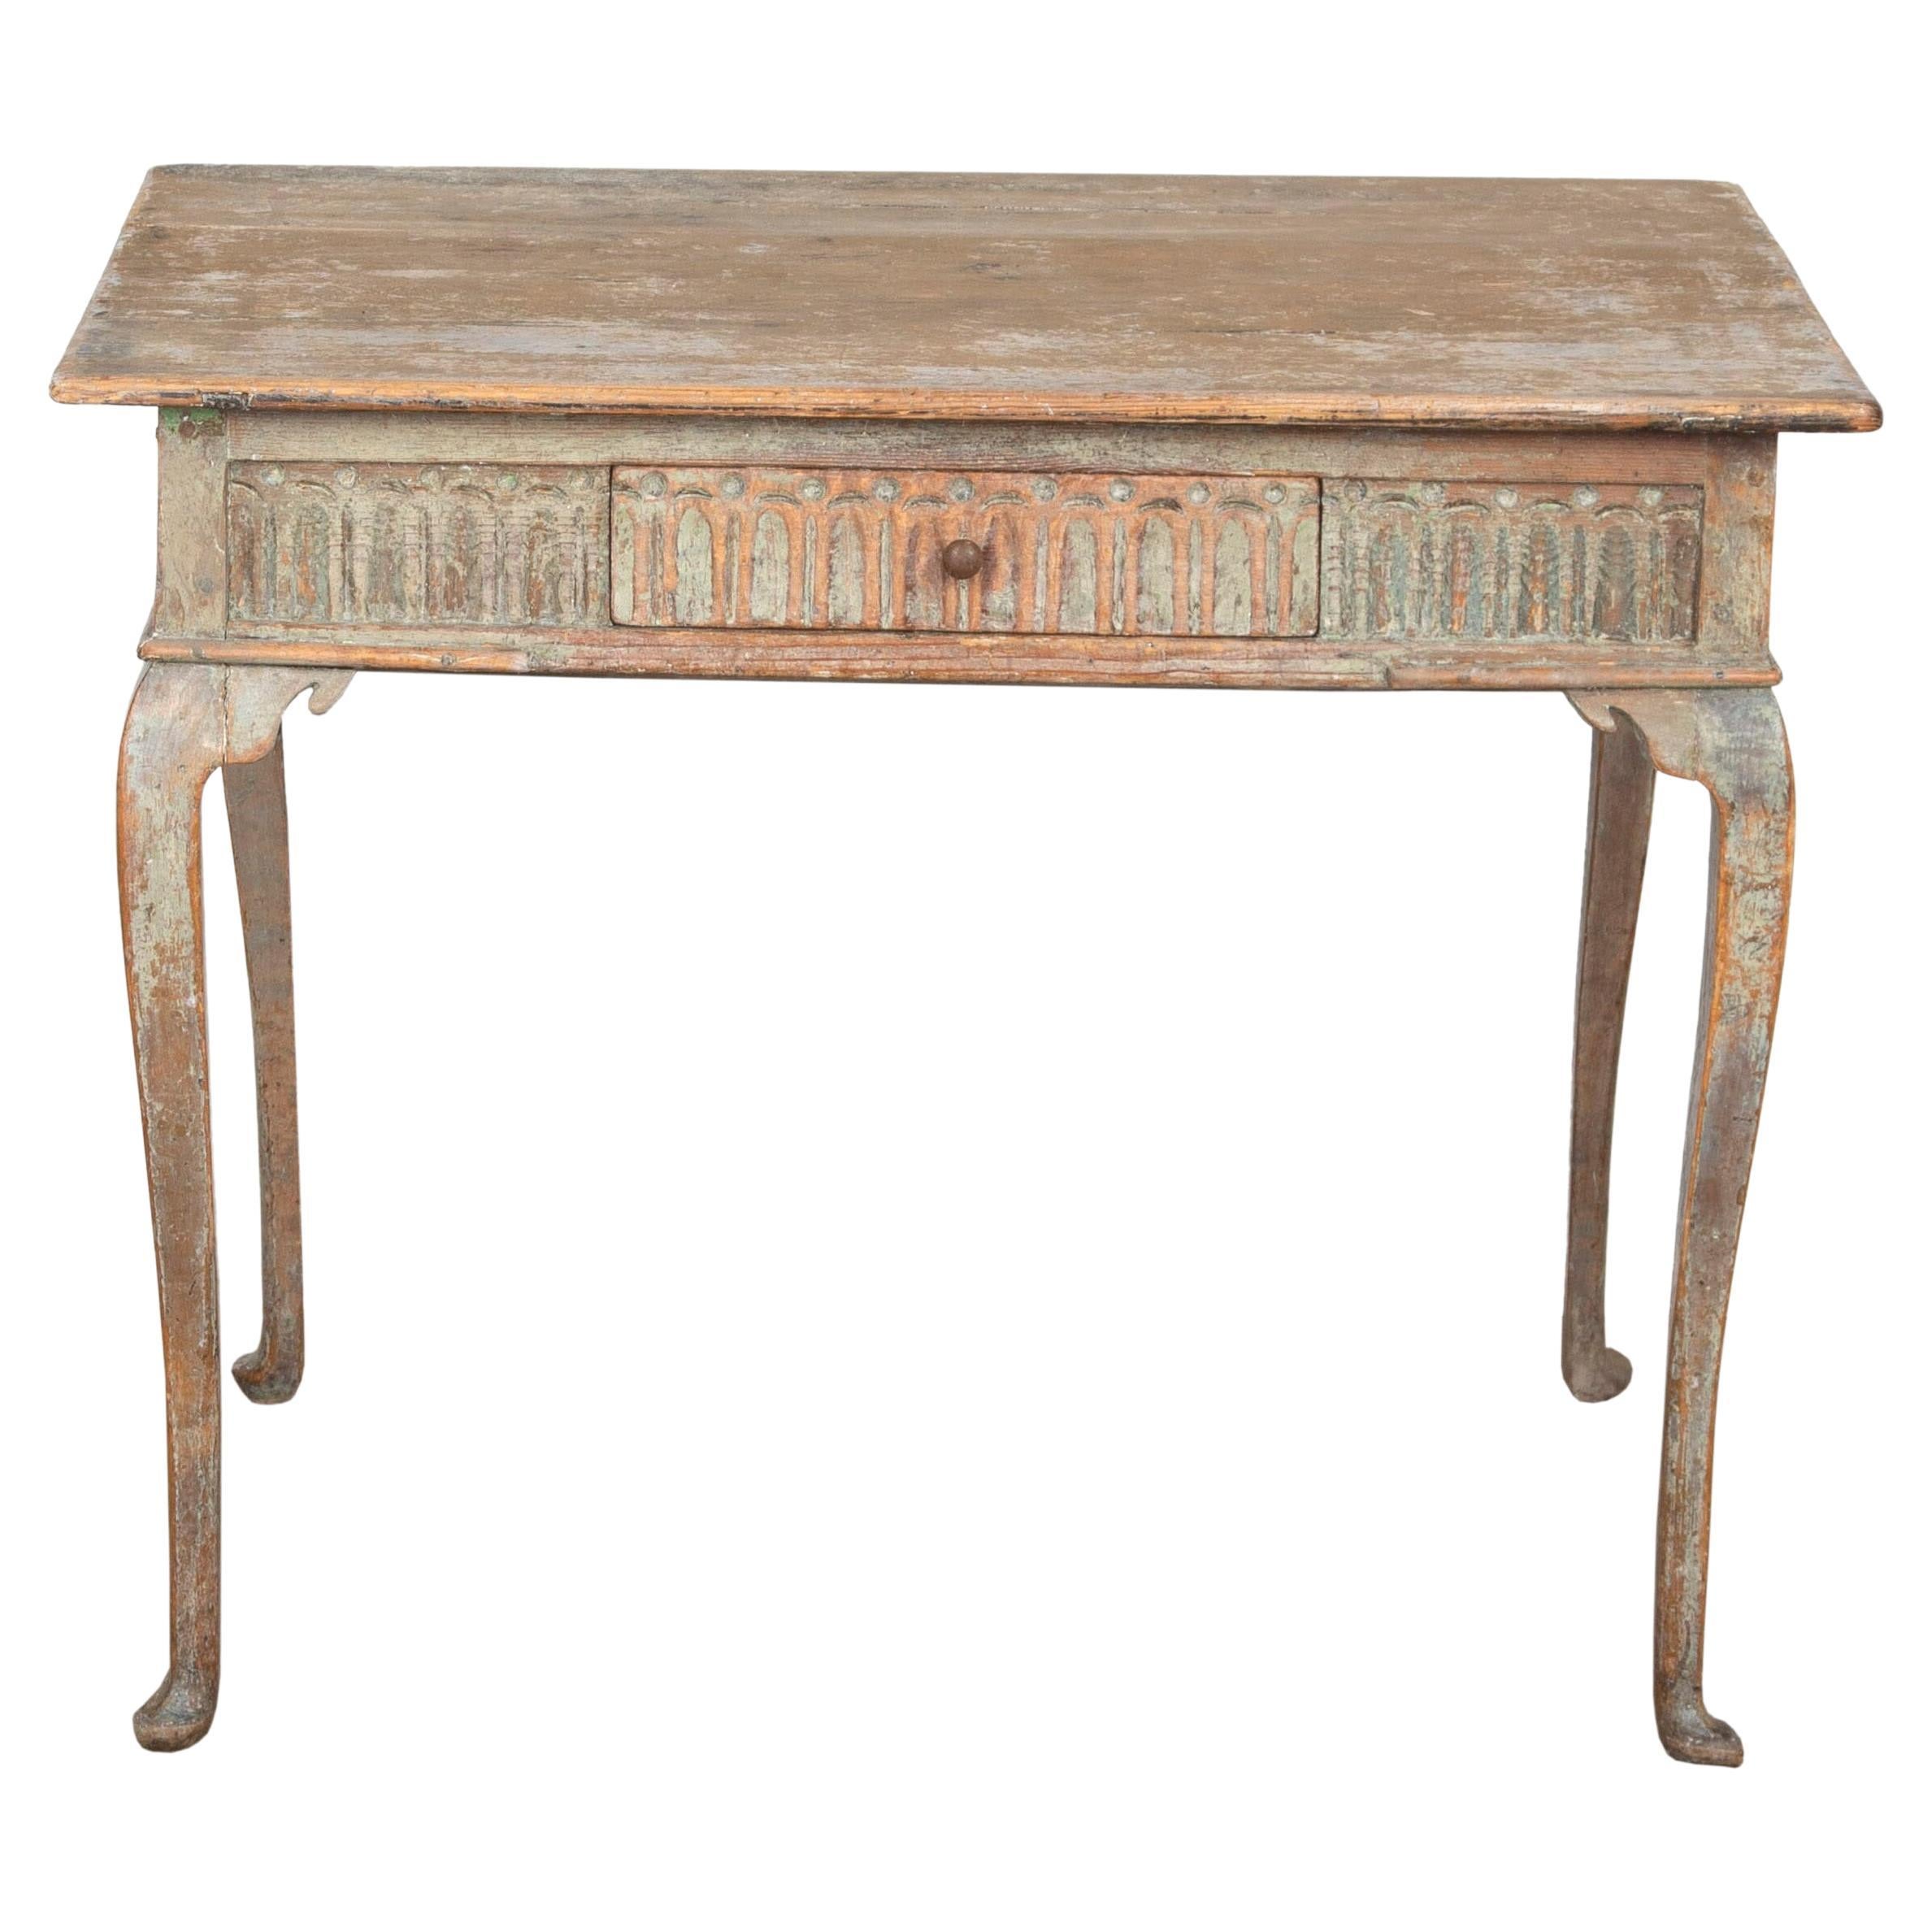 Exceptional 18th Century Table in Original Paint from Finland